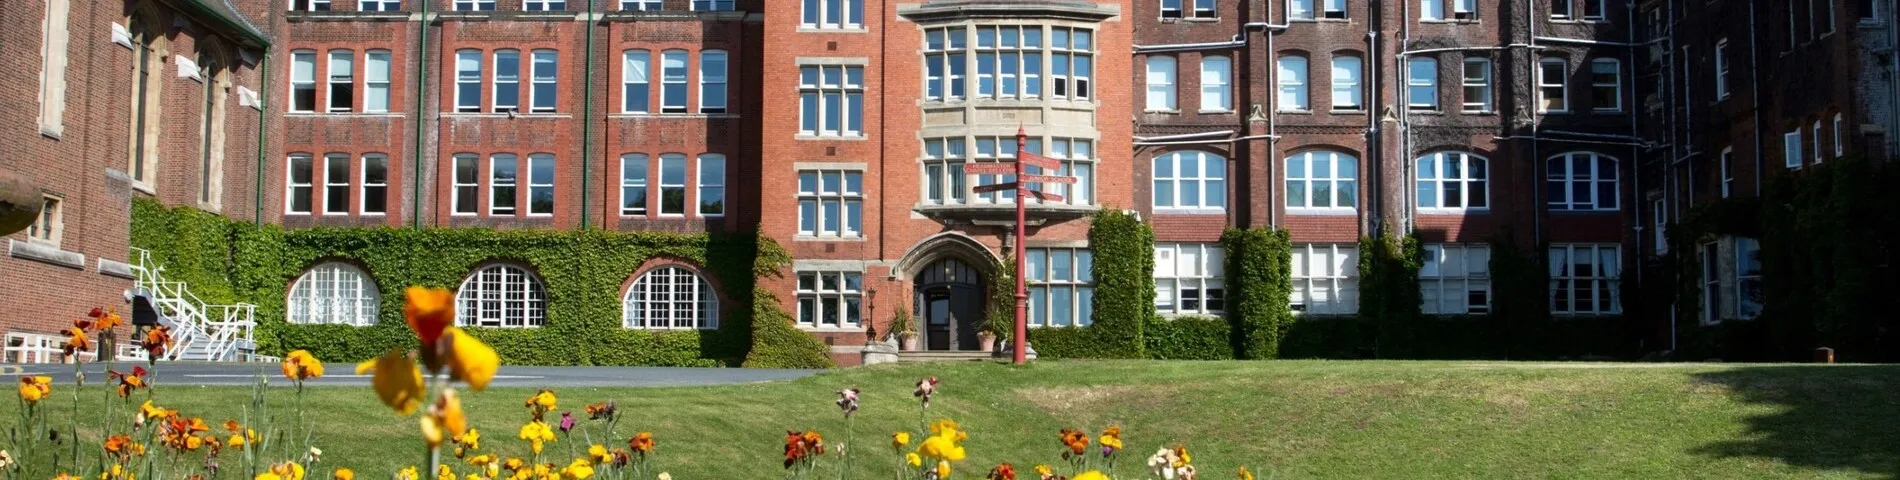 Accord Junior Centre St Lawrence College 사진 1